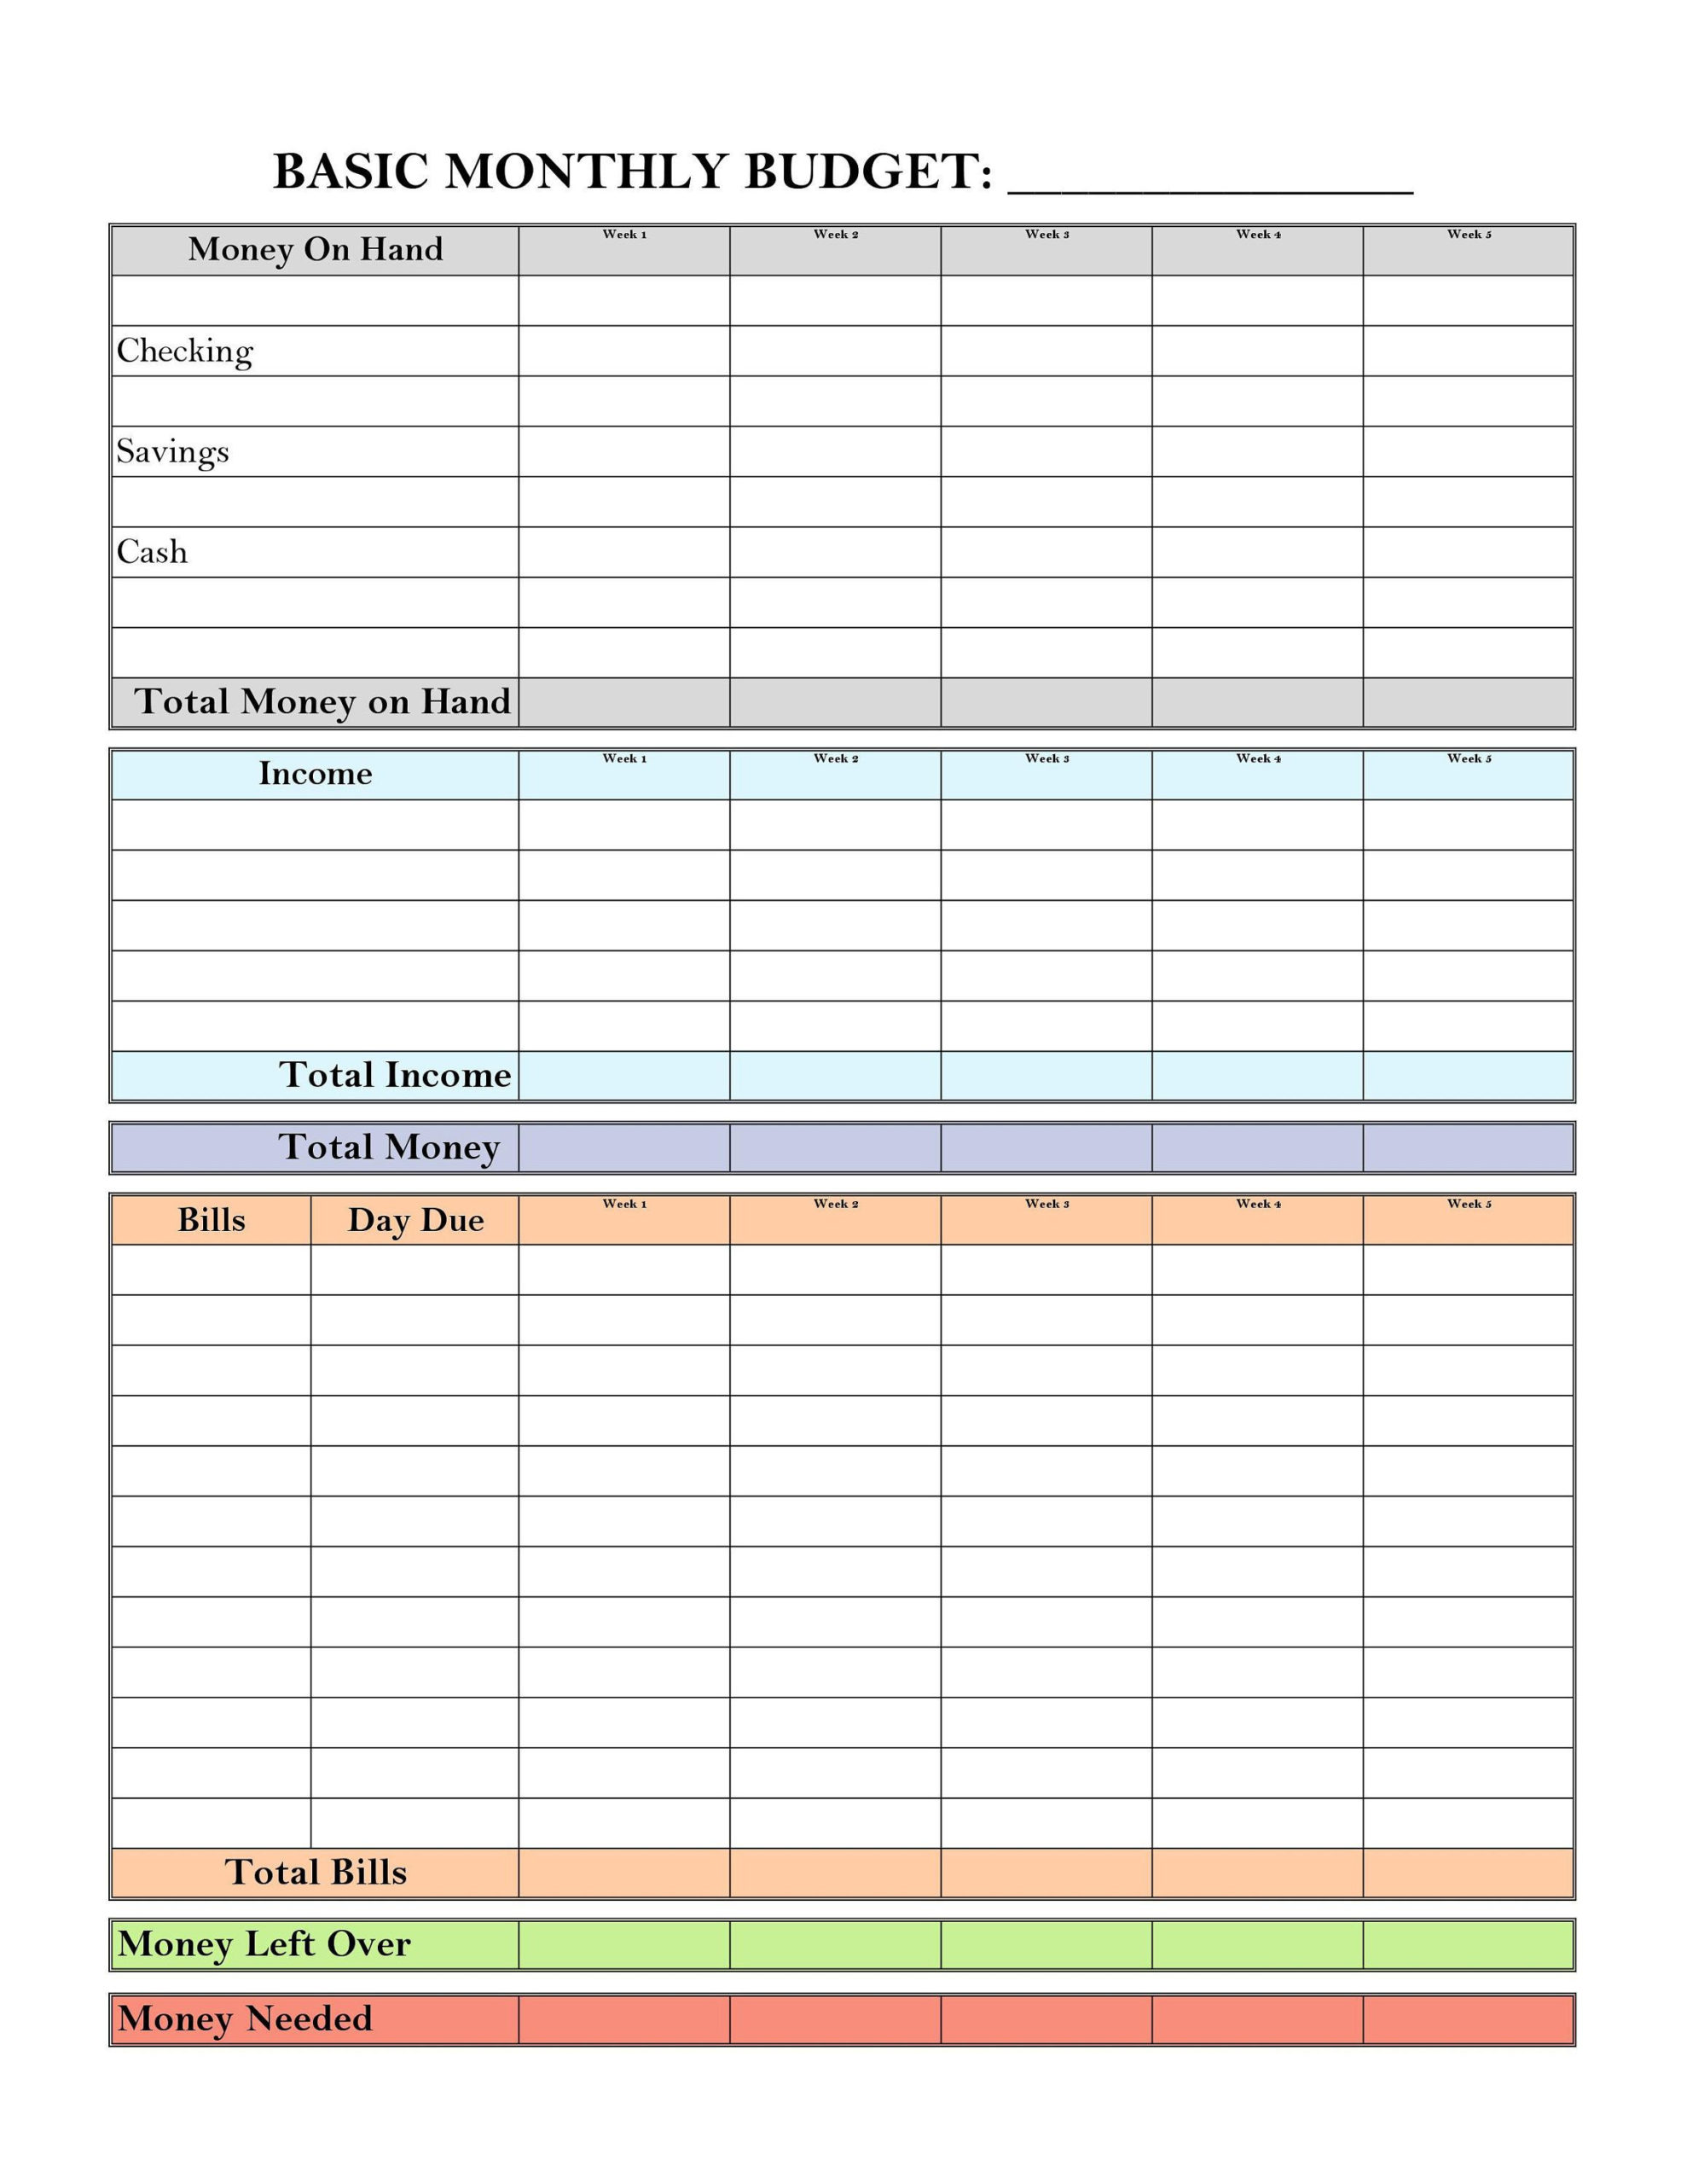 Basic Monthly Budget Form For Weekly Pay PDF Google Sheet Etsy 